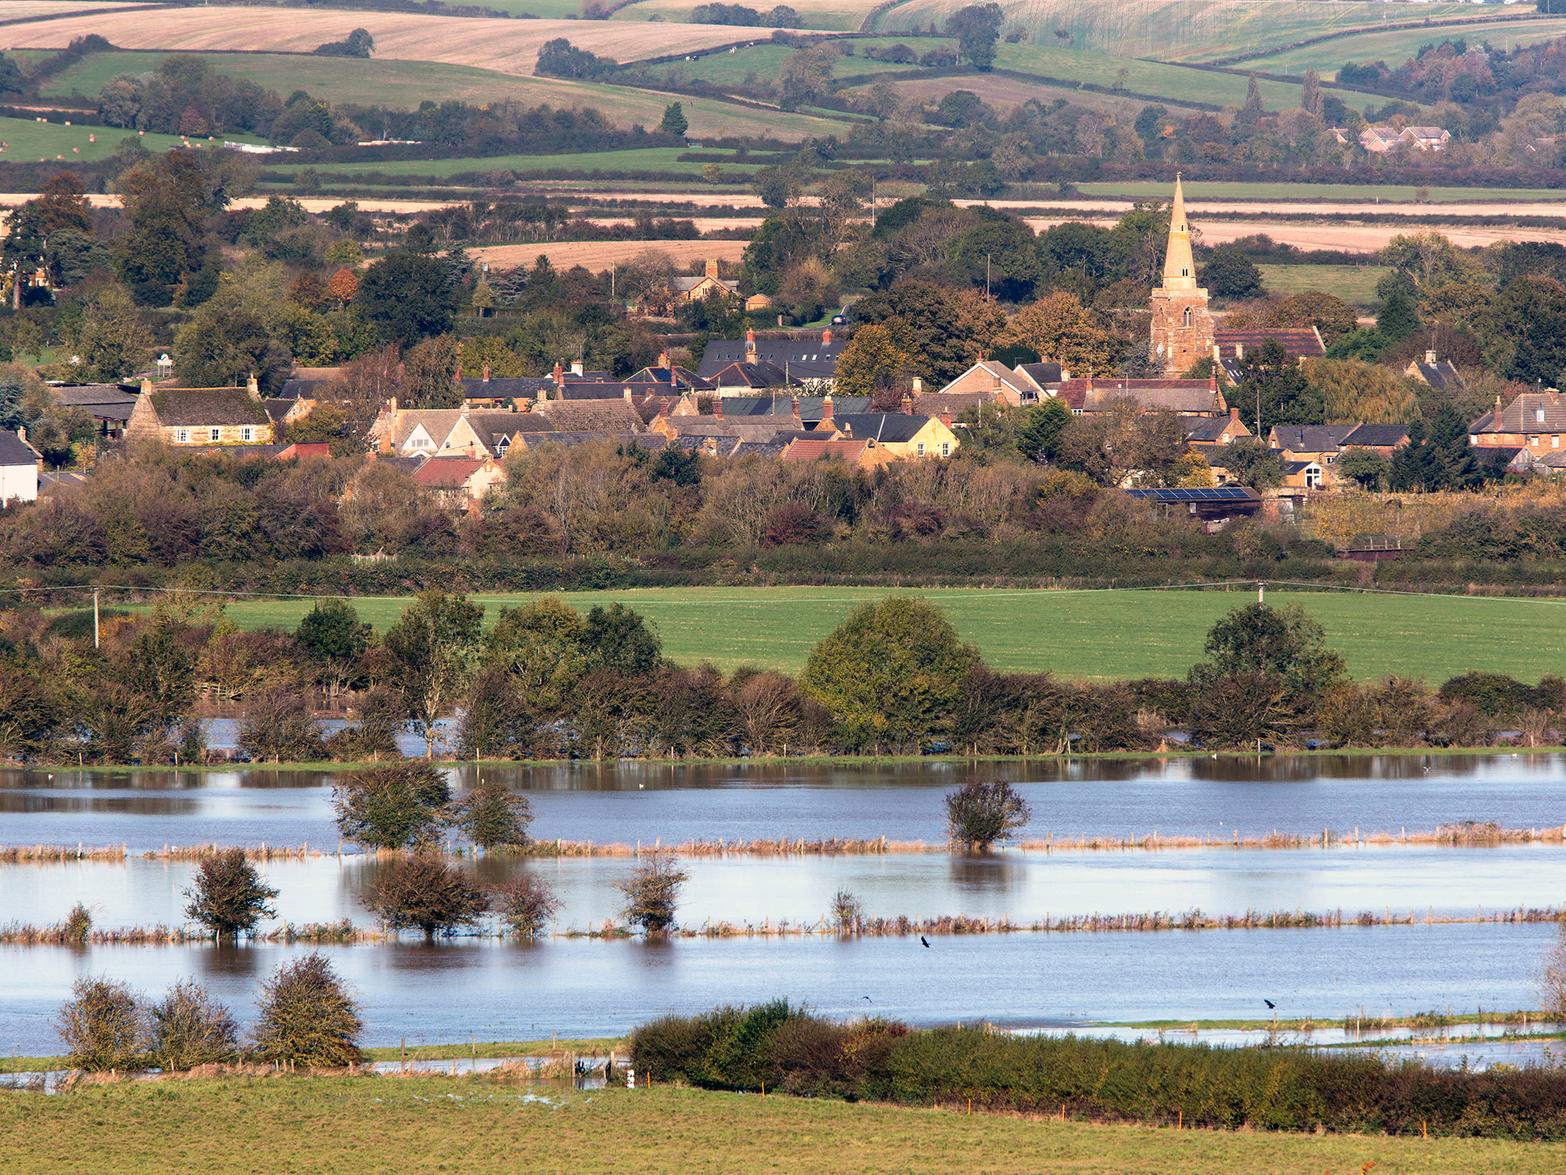 The flooding filled several fields just outside Caldecott.